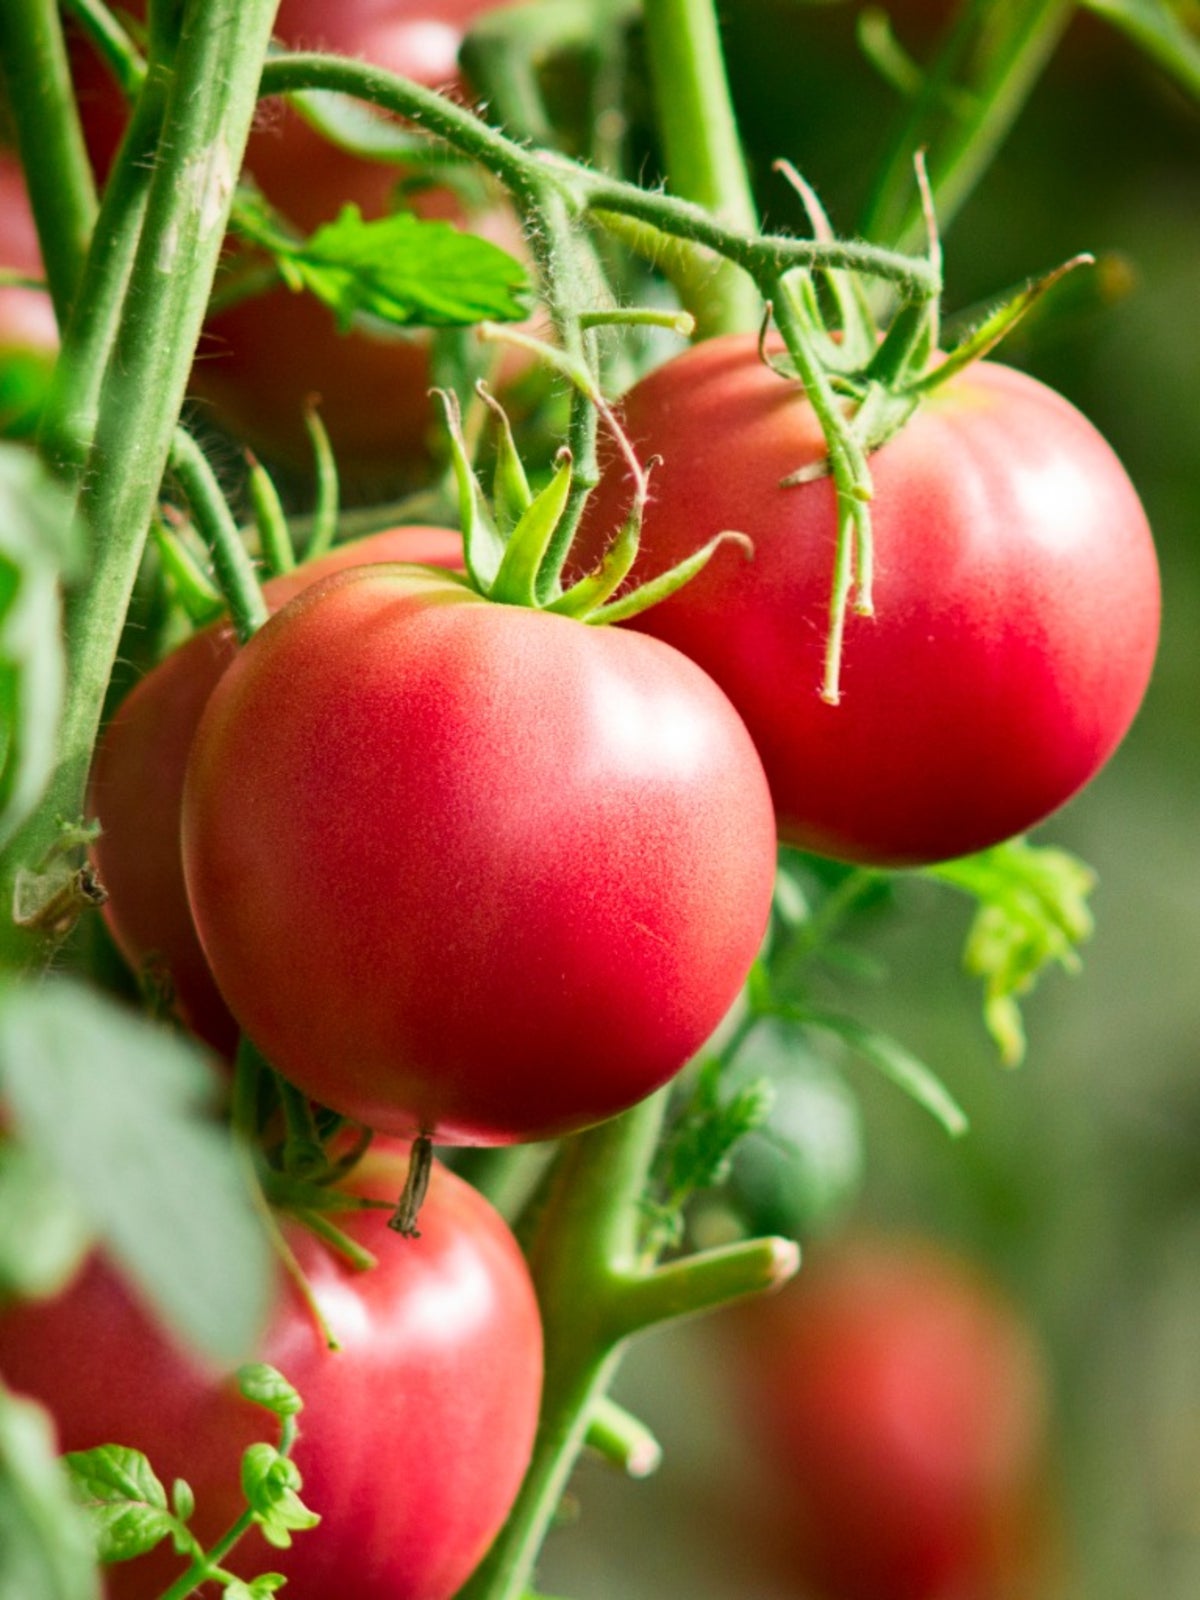 Growing Tomatoes - How To Grow Tomatoes